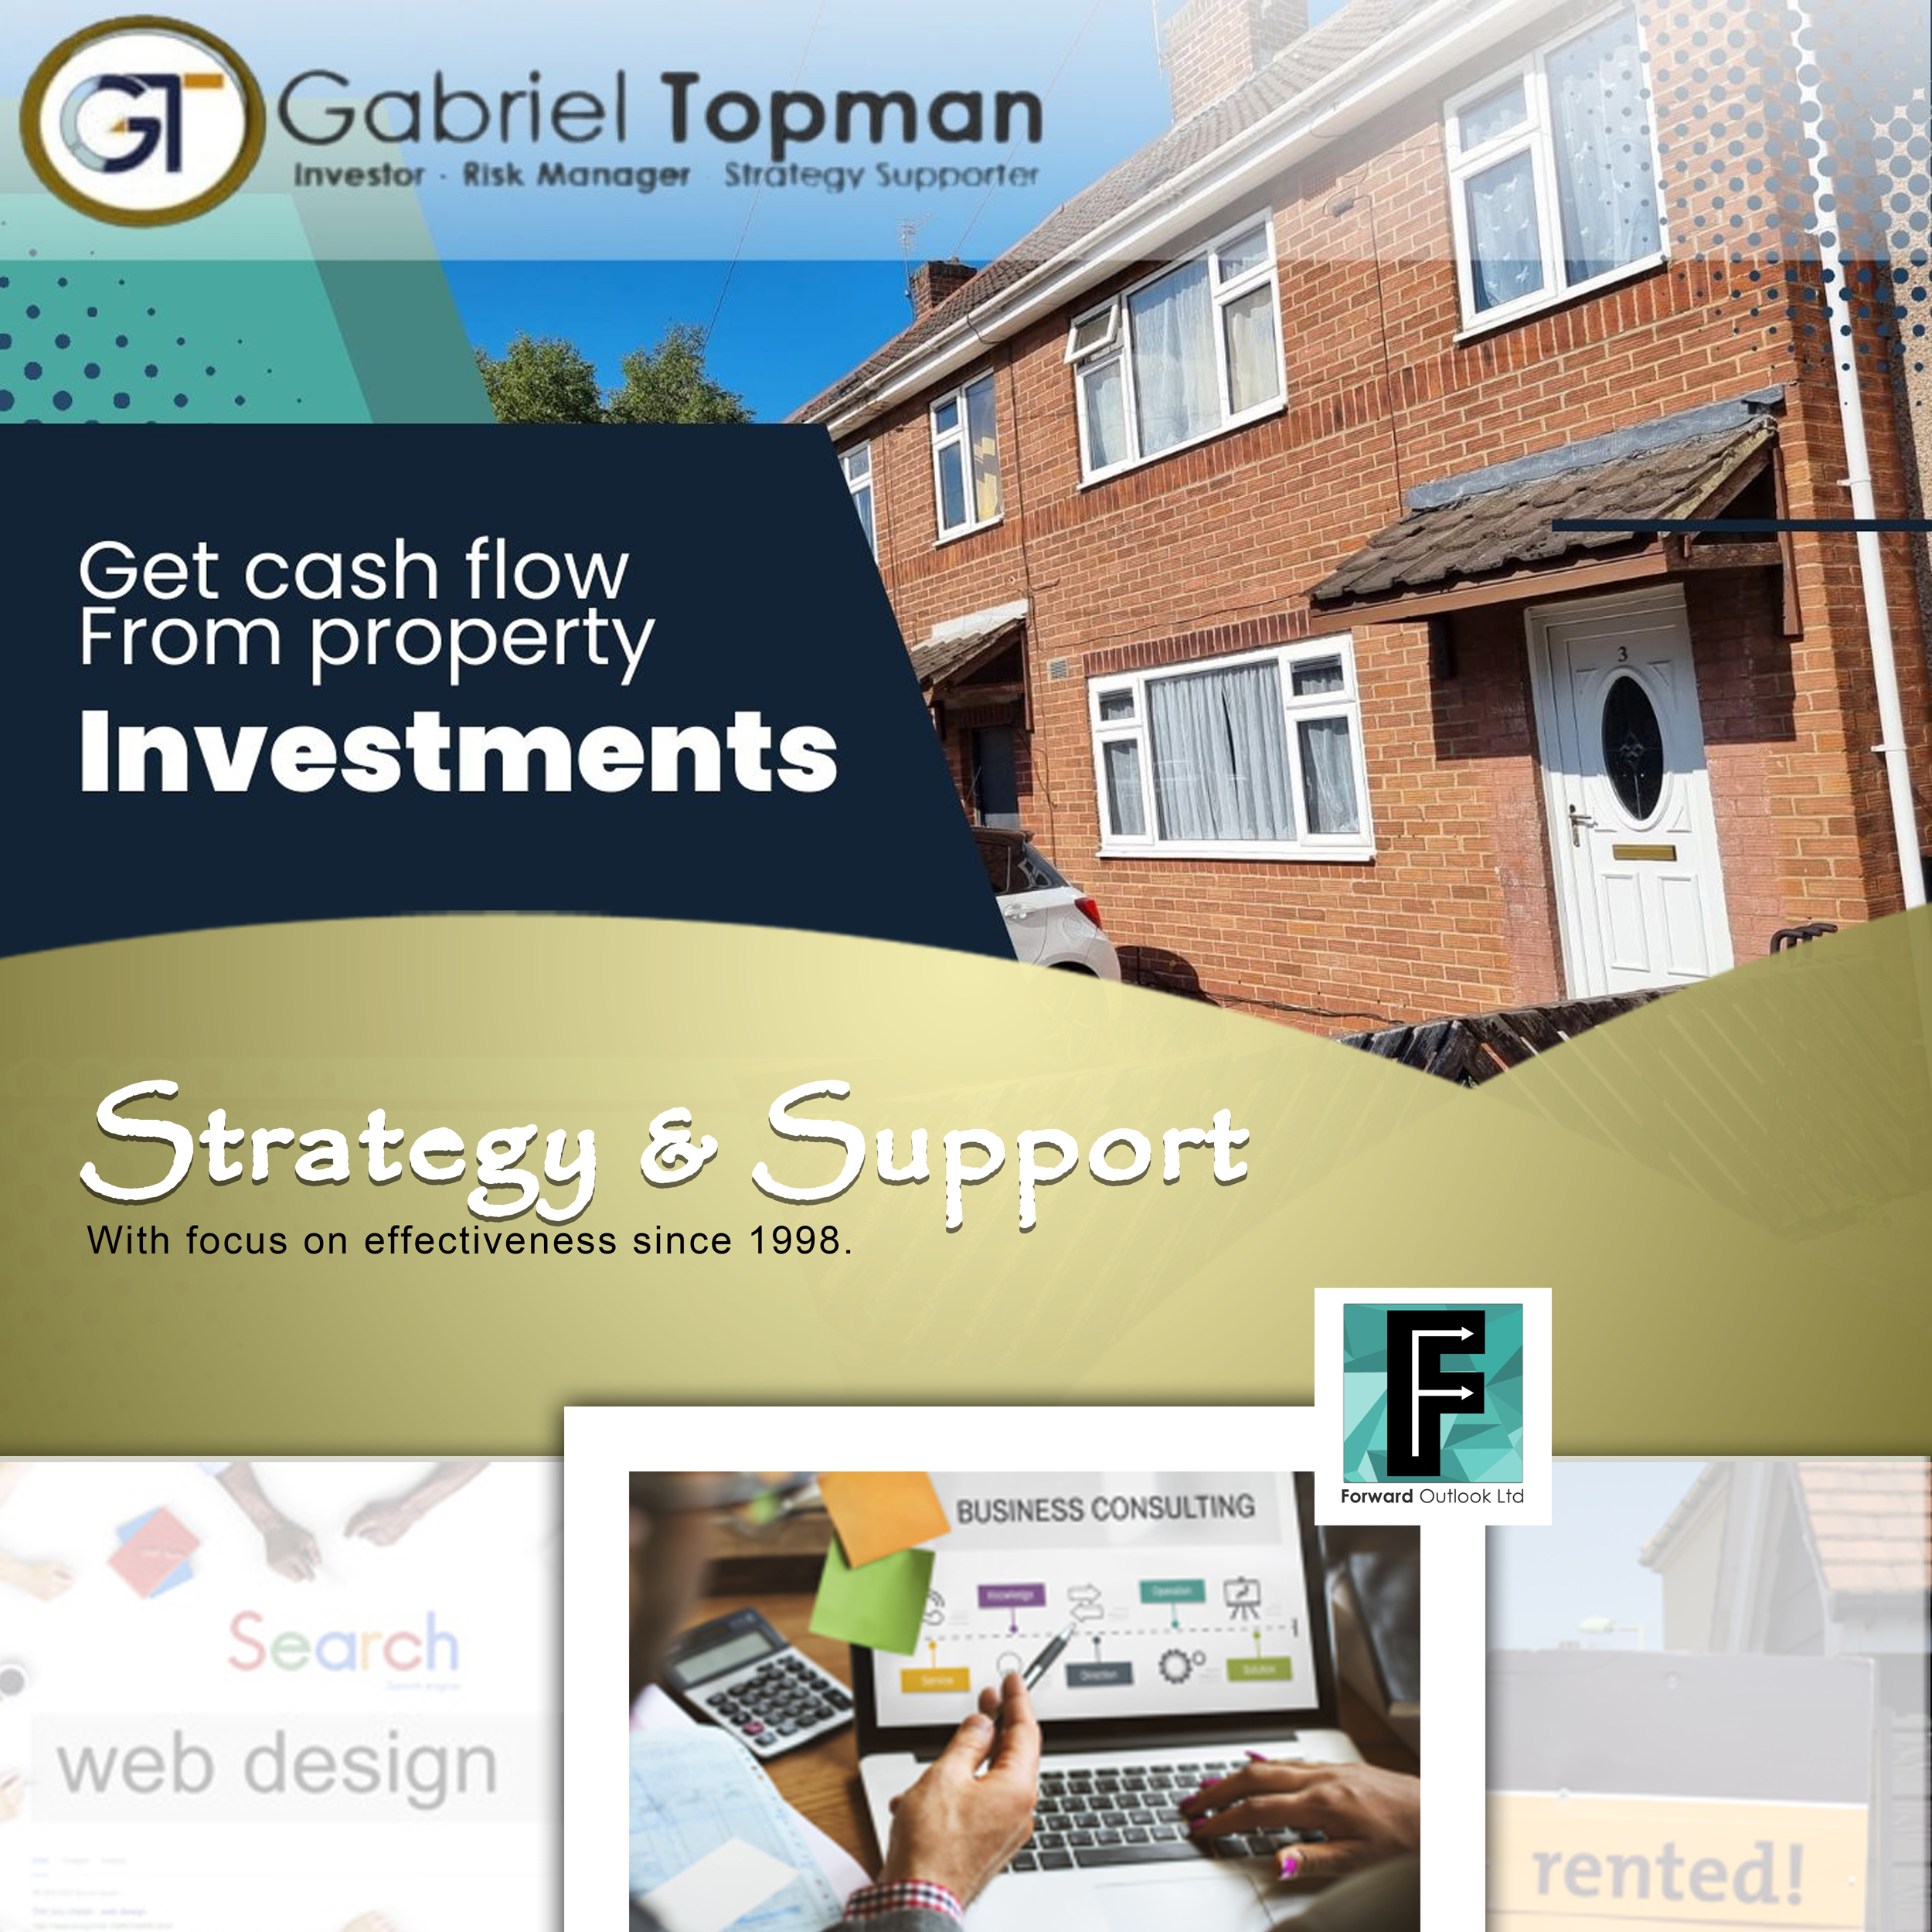 Get Cash flow from property investment. Why work with us? Discover proven solutions for Mortgage-free Property investment, Beat inflation with guaranteed high returns, turn property into lucrative side hustle